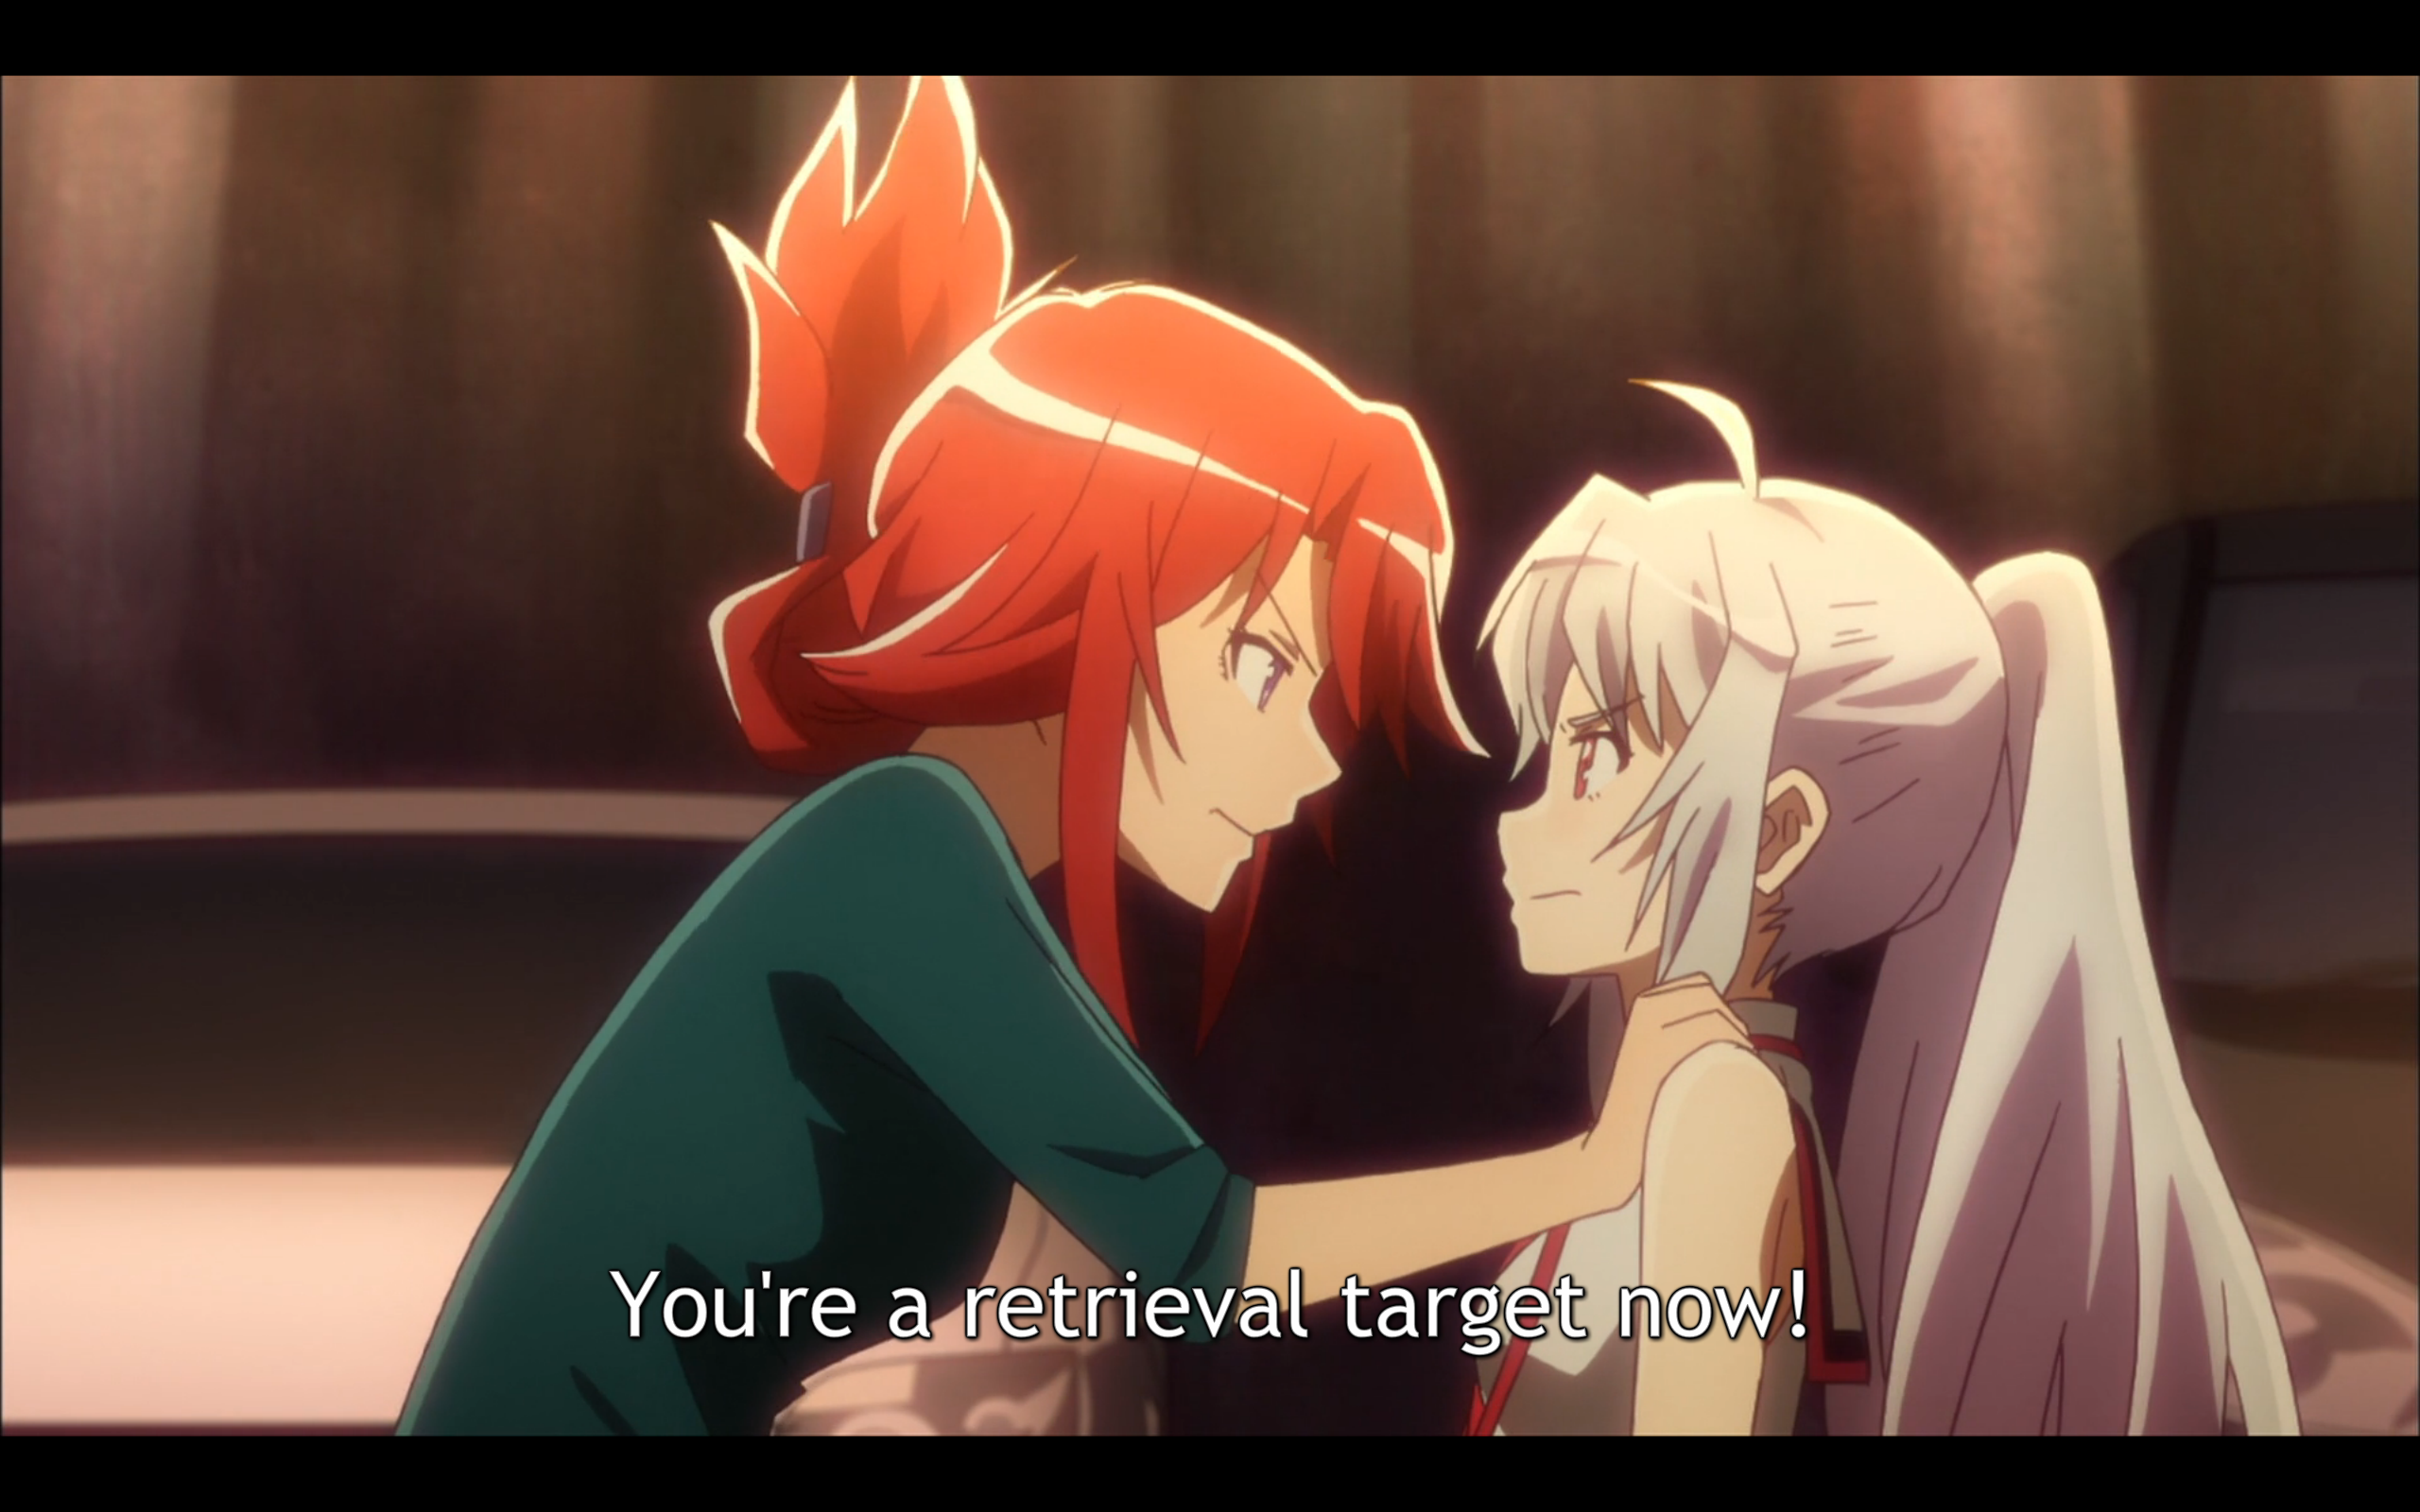 Review/discussion about: Plastic Memories